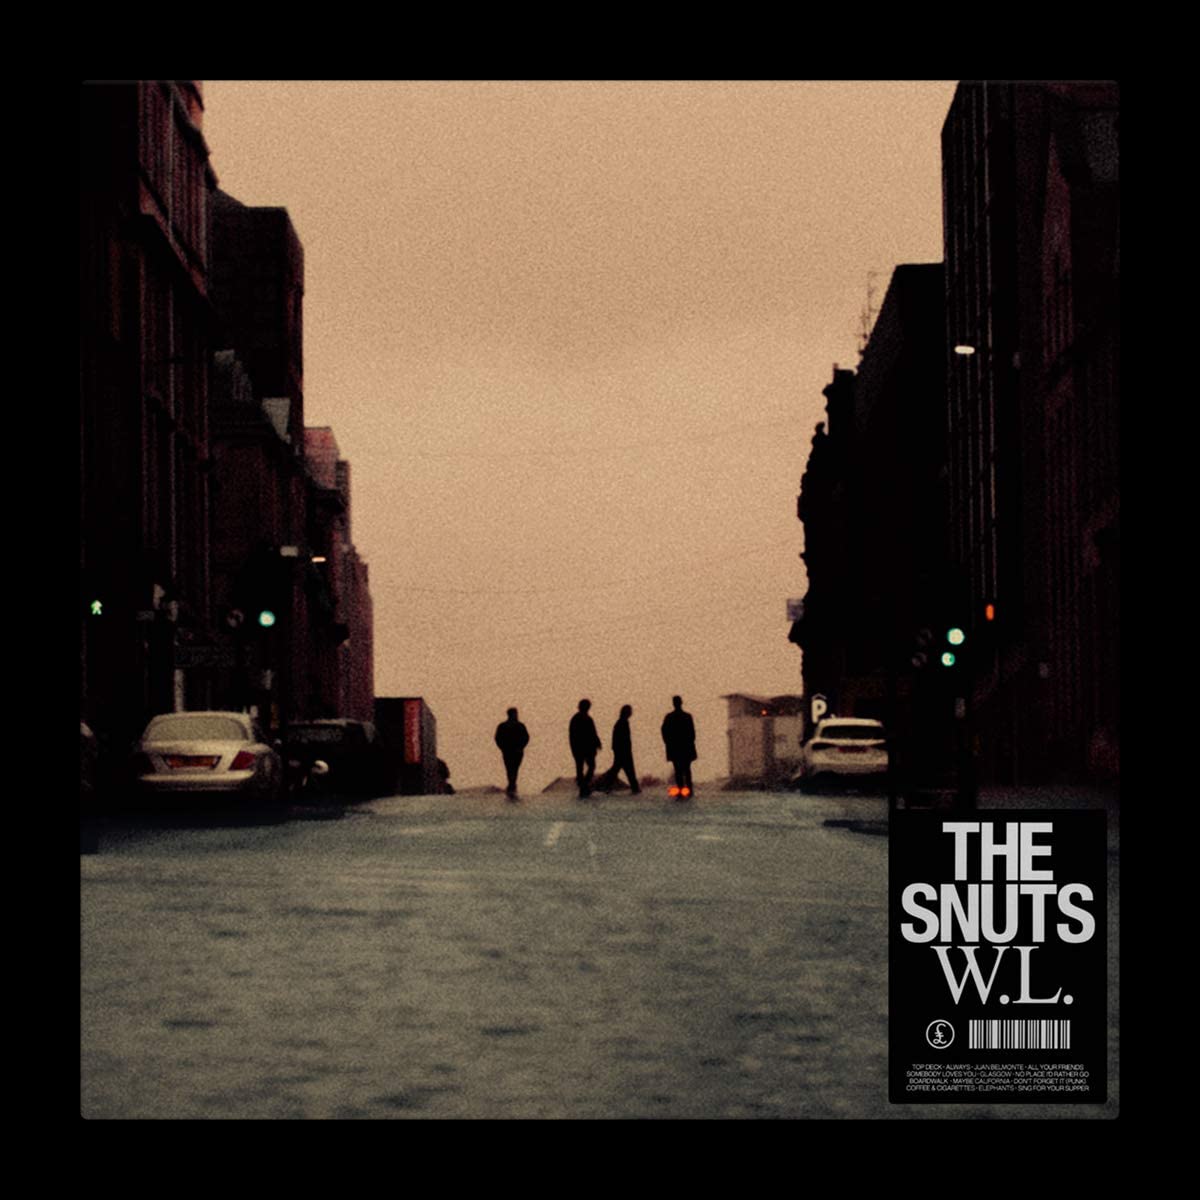 Produced by Tony Hoffer! The Snuts W.L. debuts at #1 on the UK Official Album Chart 100!